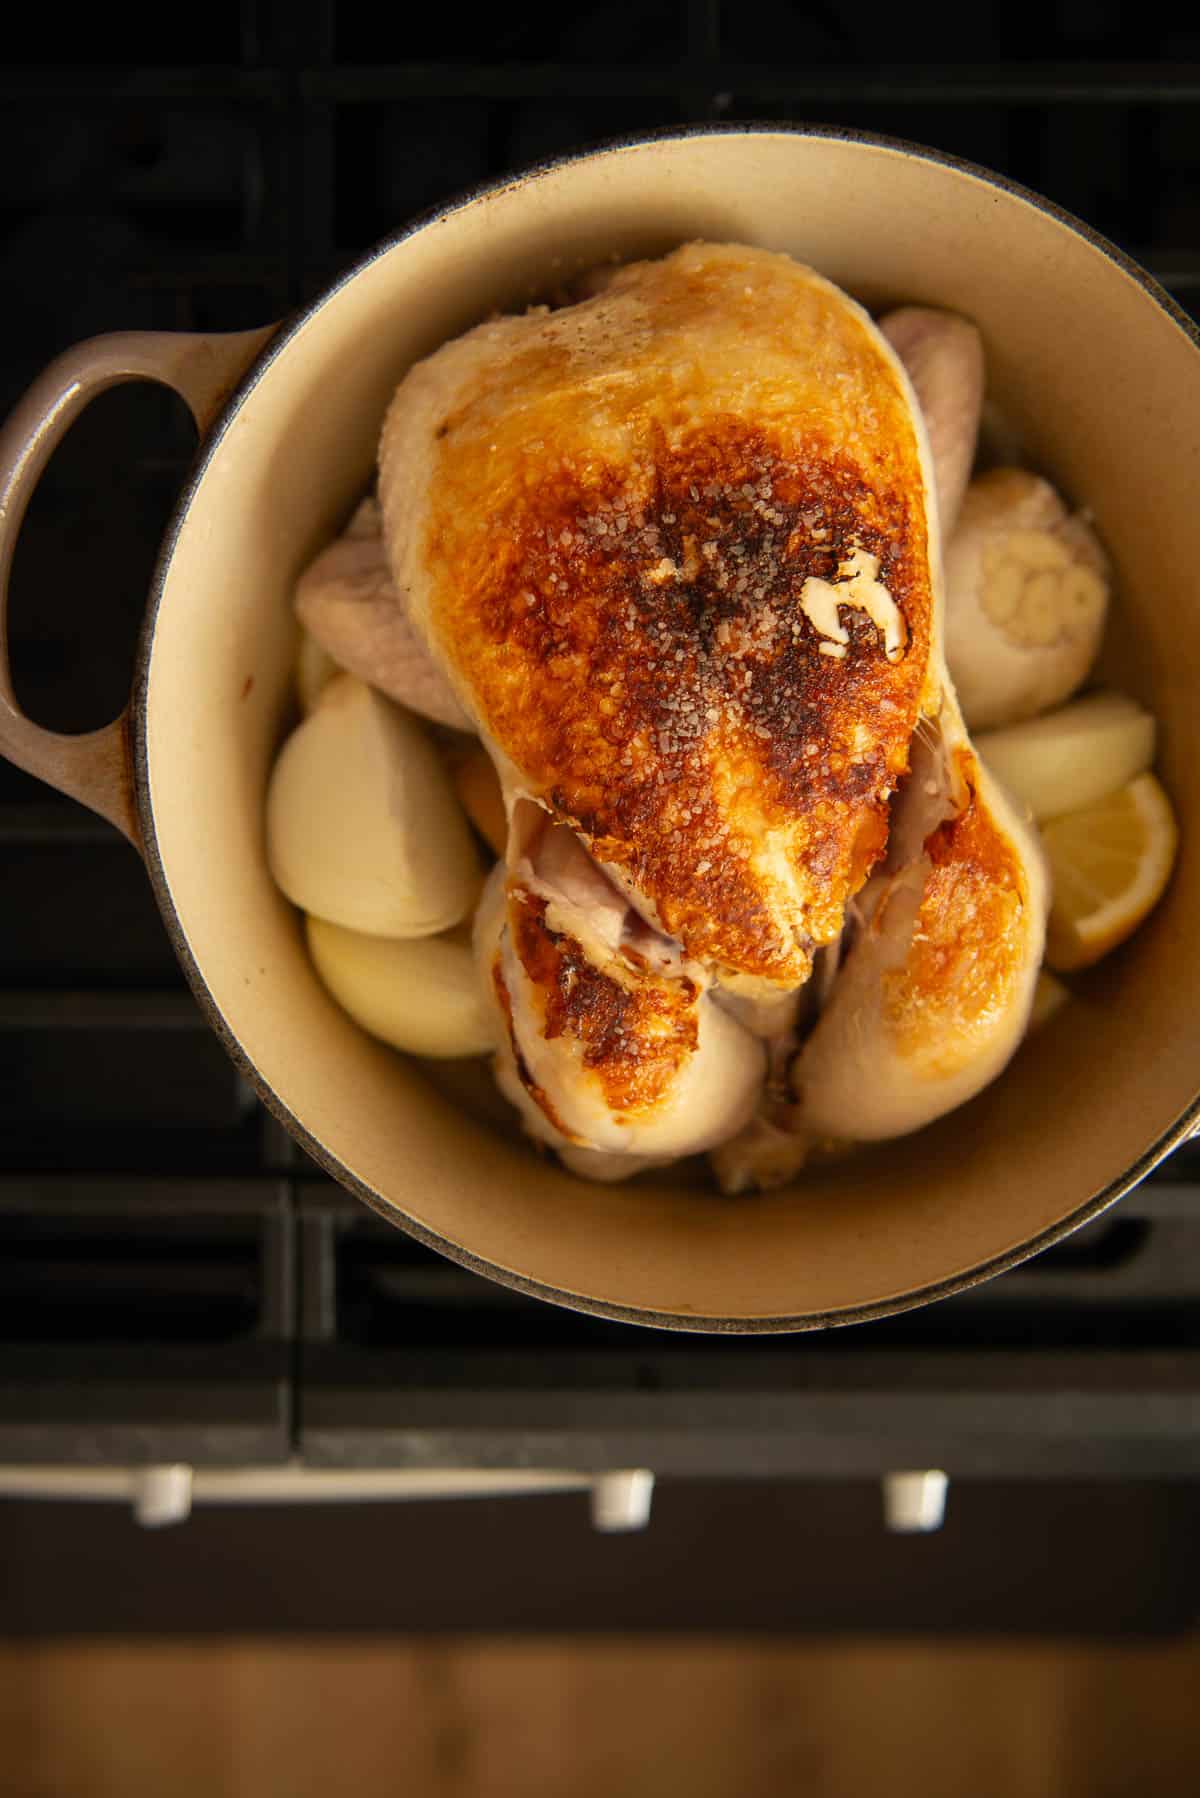 Chicken with skin browned in a Dutch oven on the stove ready to go into the oven.